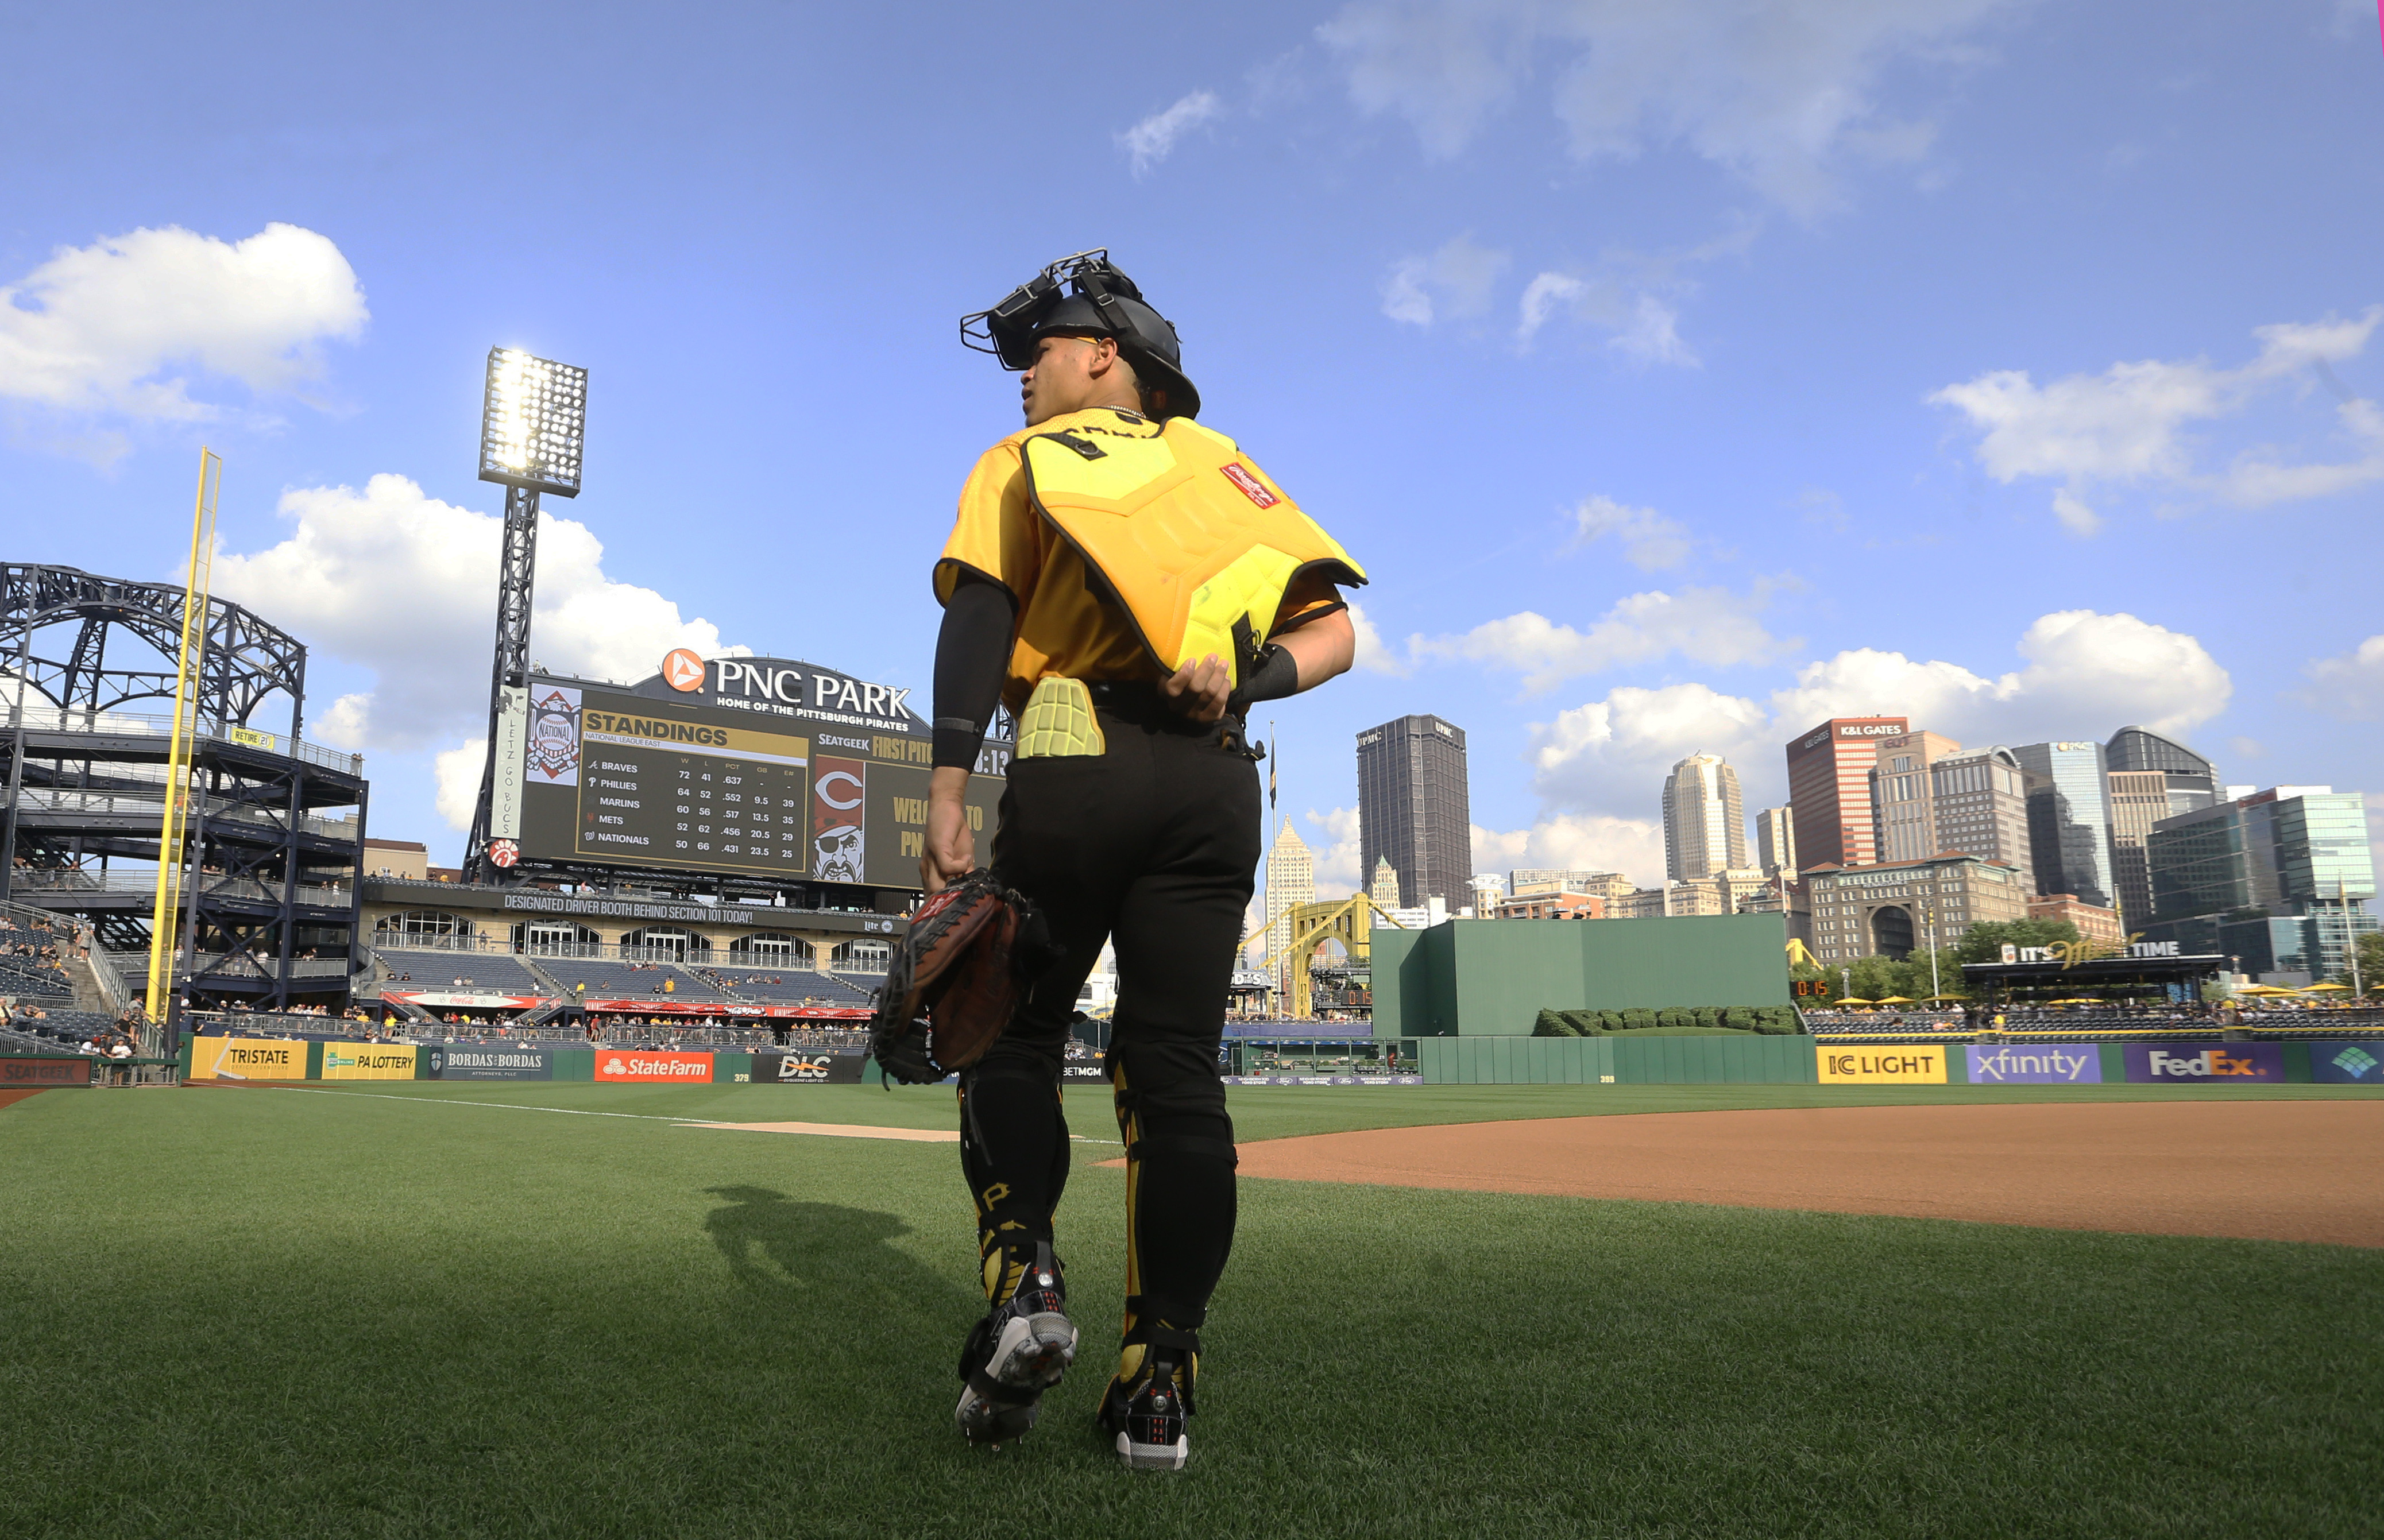 Touring the Hidden Corners of PNC Park in Pittsburgh - Uncovering PA